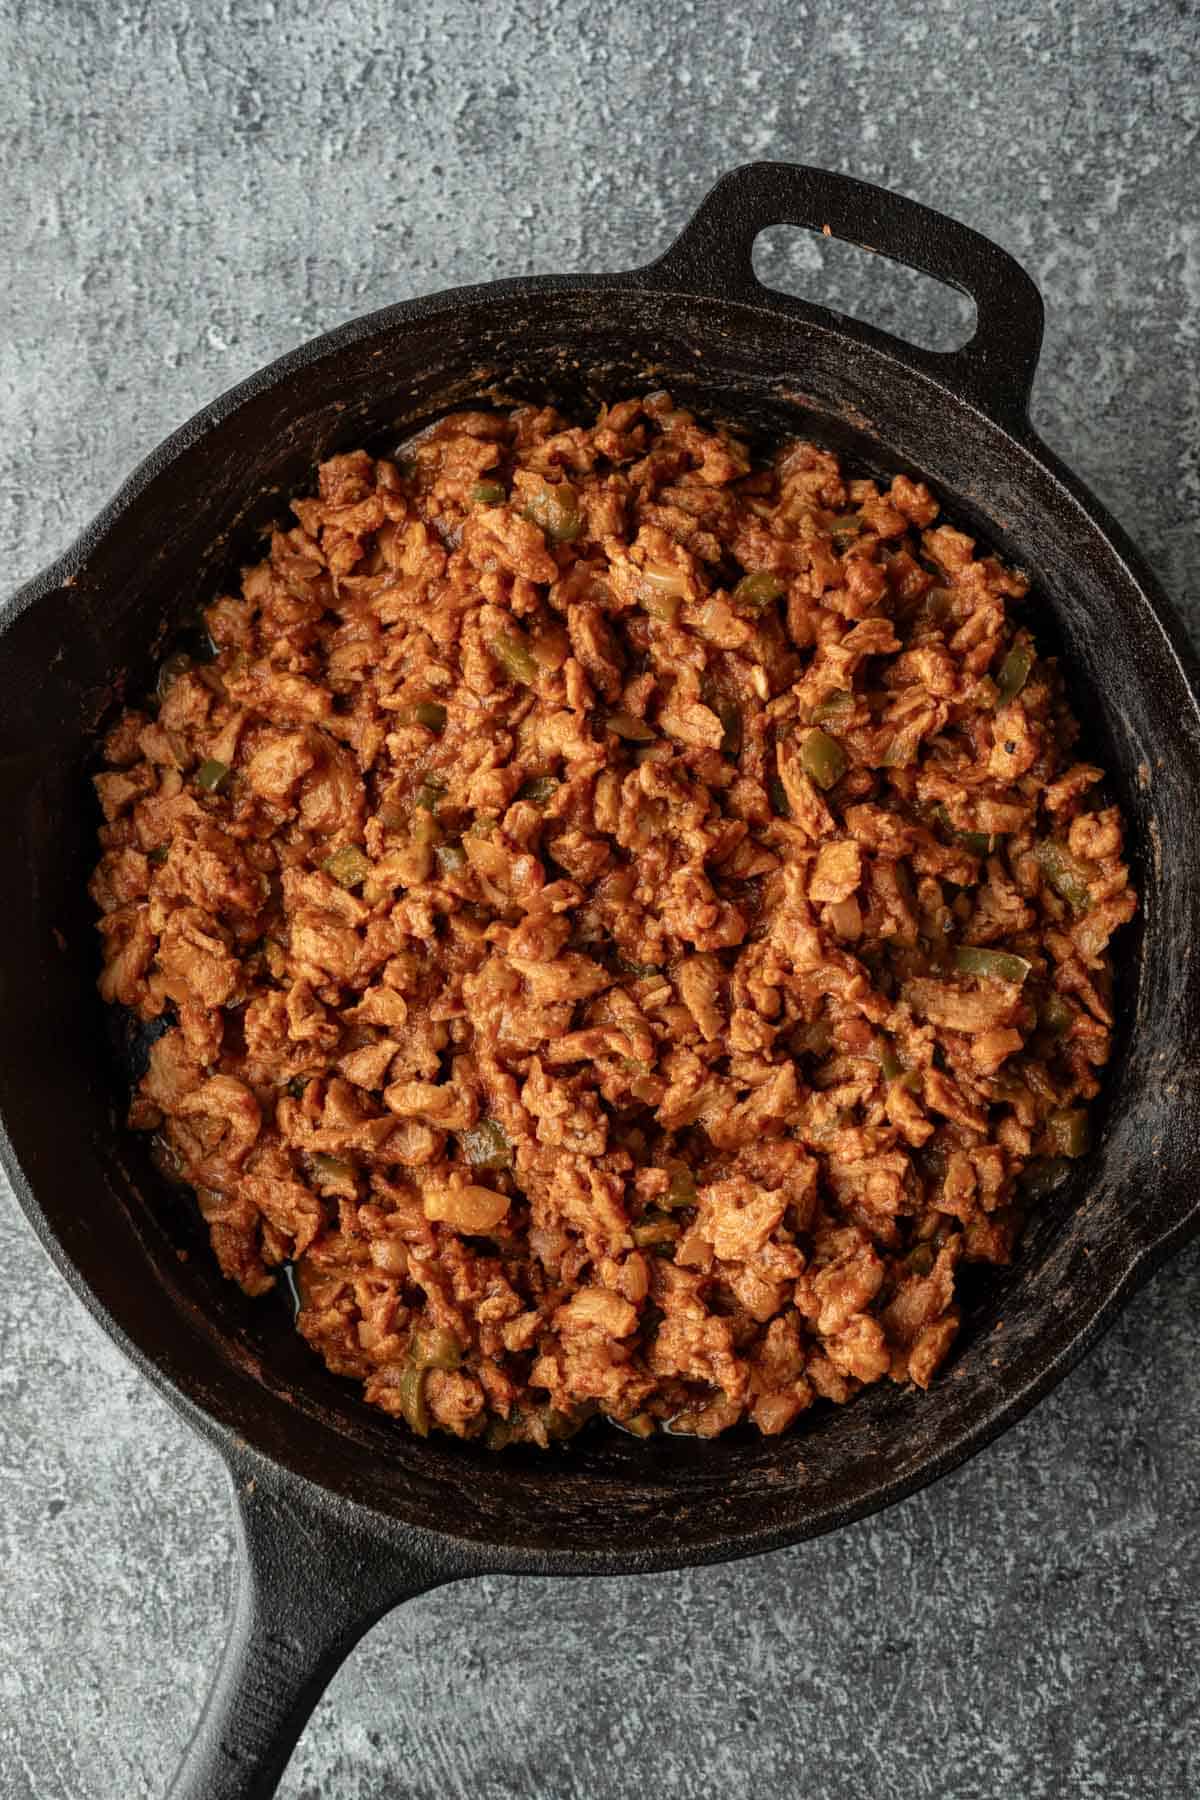 The finished soy sloppy joe mixture in a skillet.